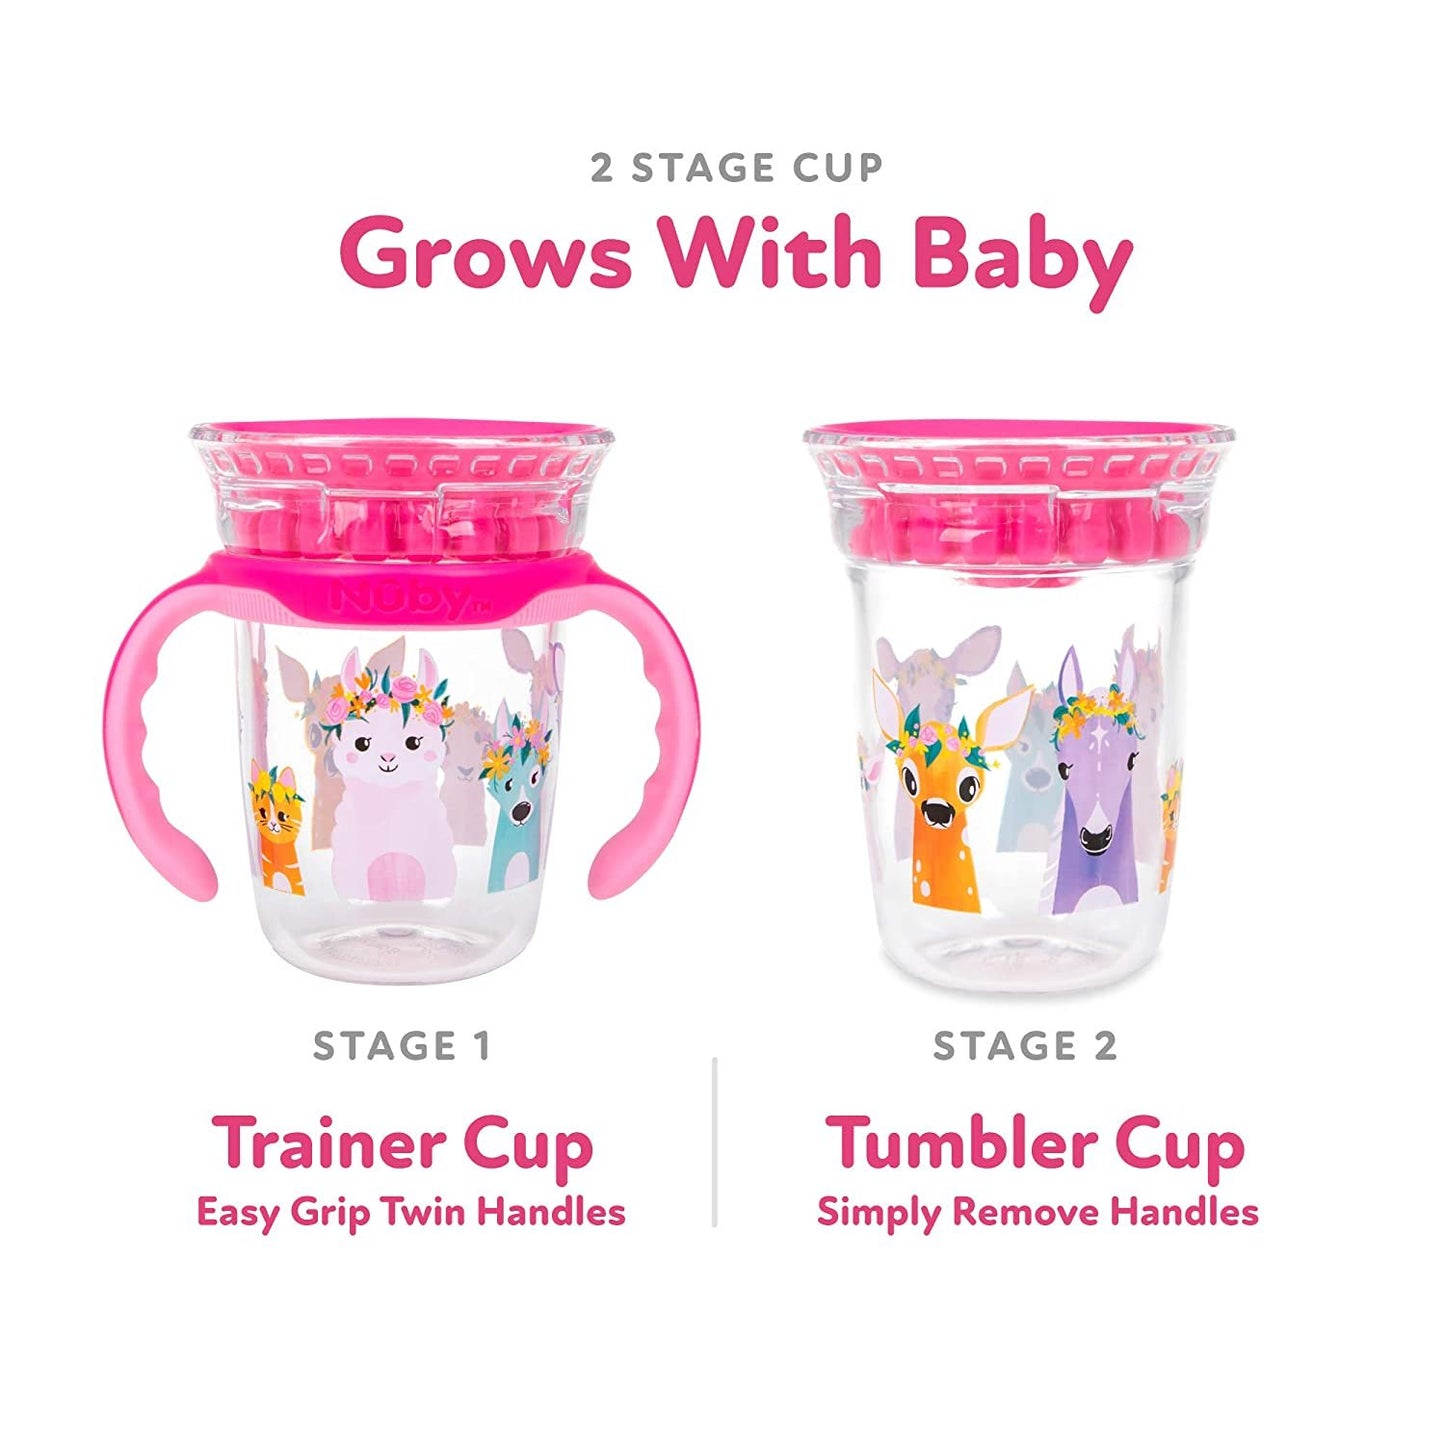 Luv N Care/NUBY Nuby 360 Edge 2 Stage Drinking Rim Cup with Removable Handles & hygienic Cover: 8 Oz/ 240 Ml, 12M+, Flower Crowns, Pink